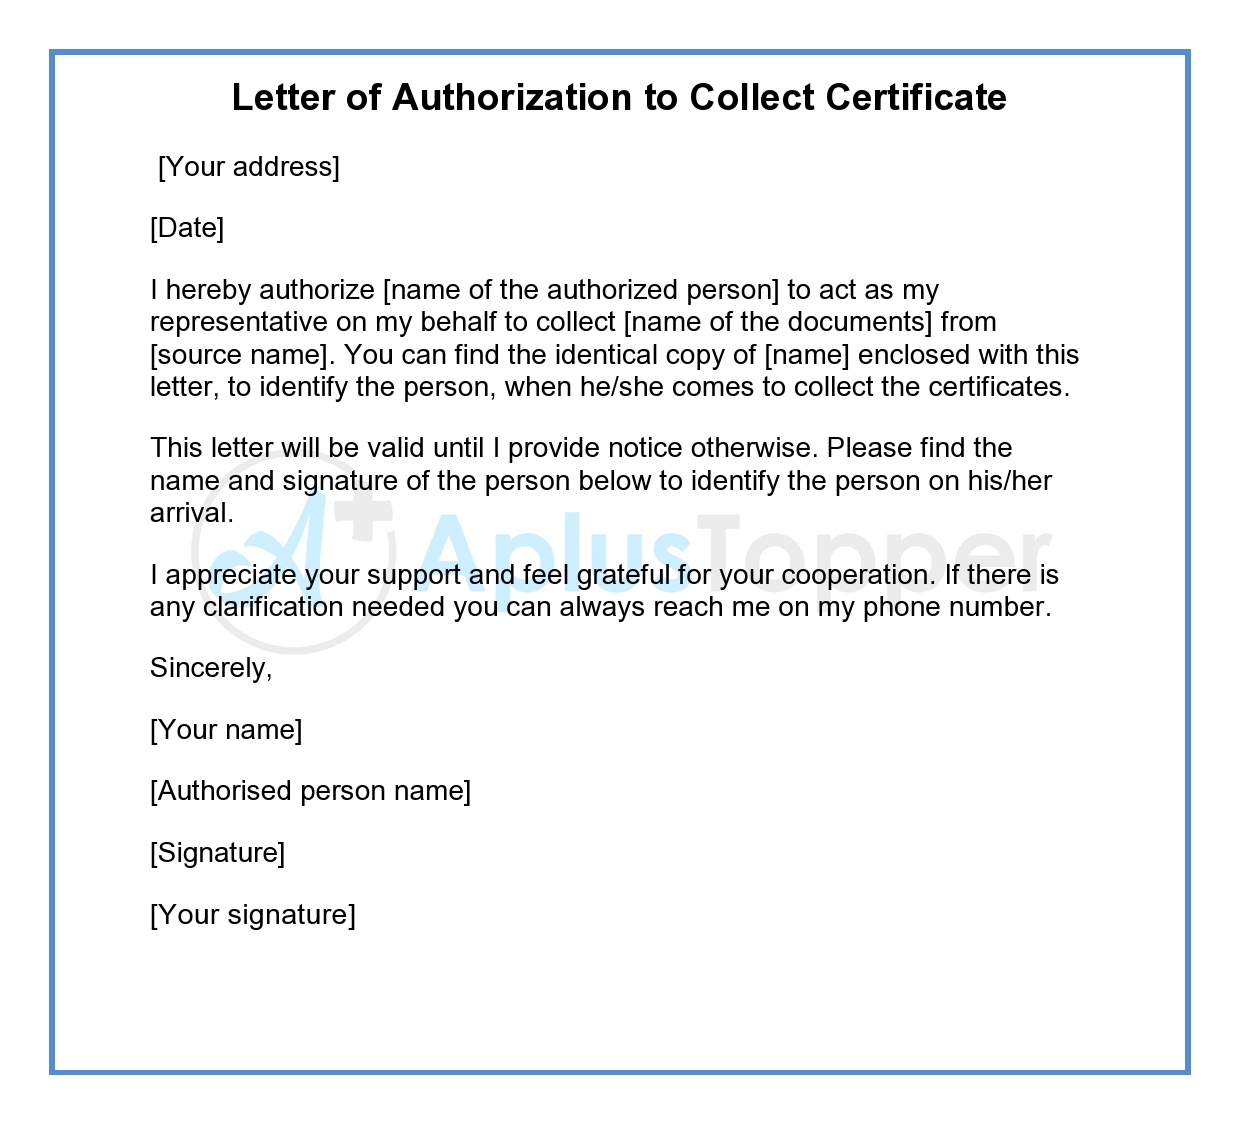 Letter of Authorization to Collect Certificate